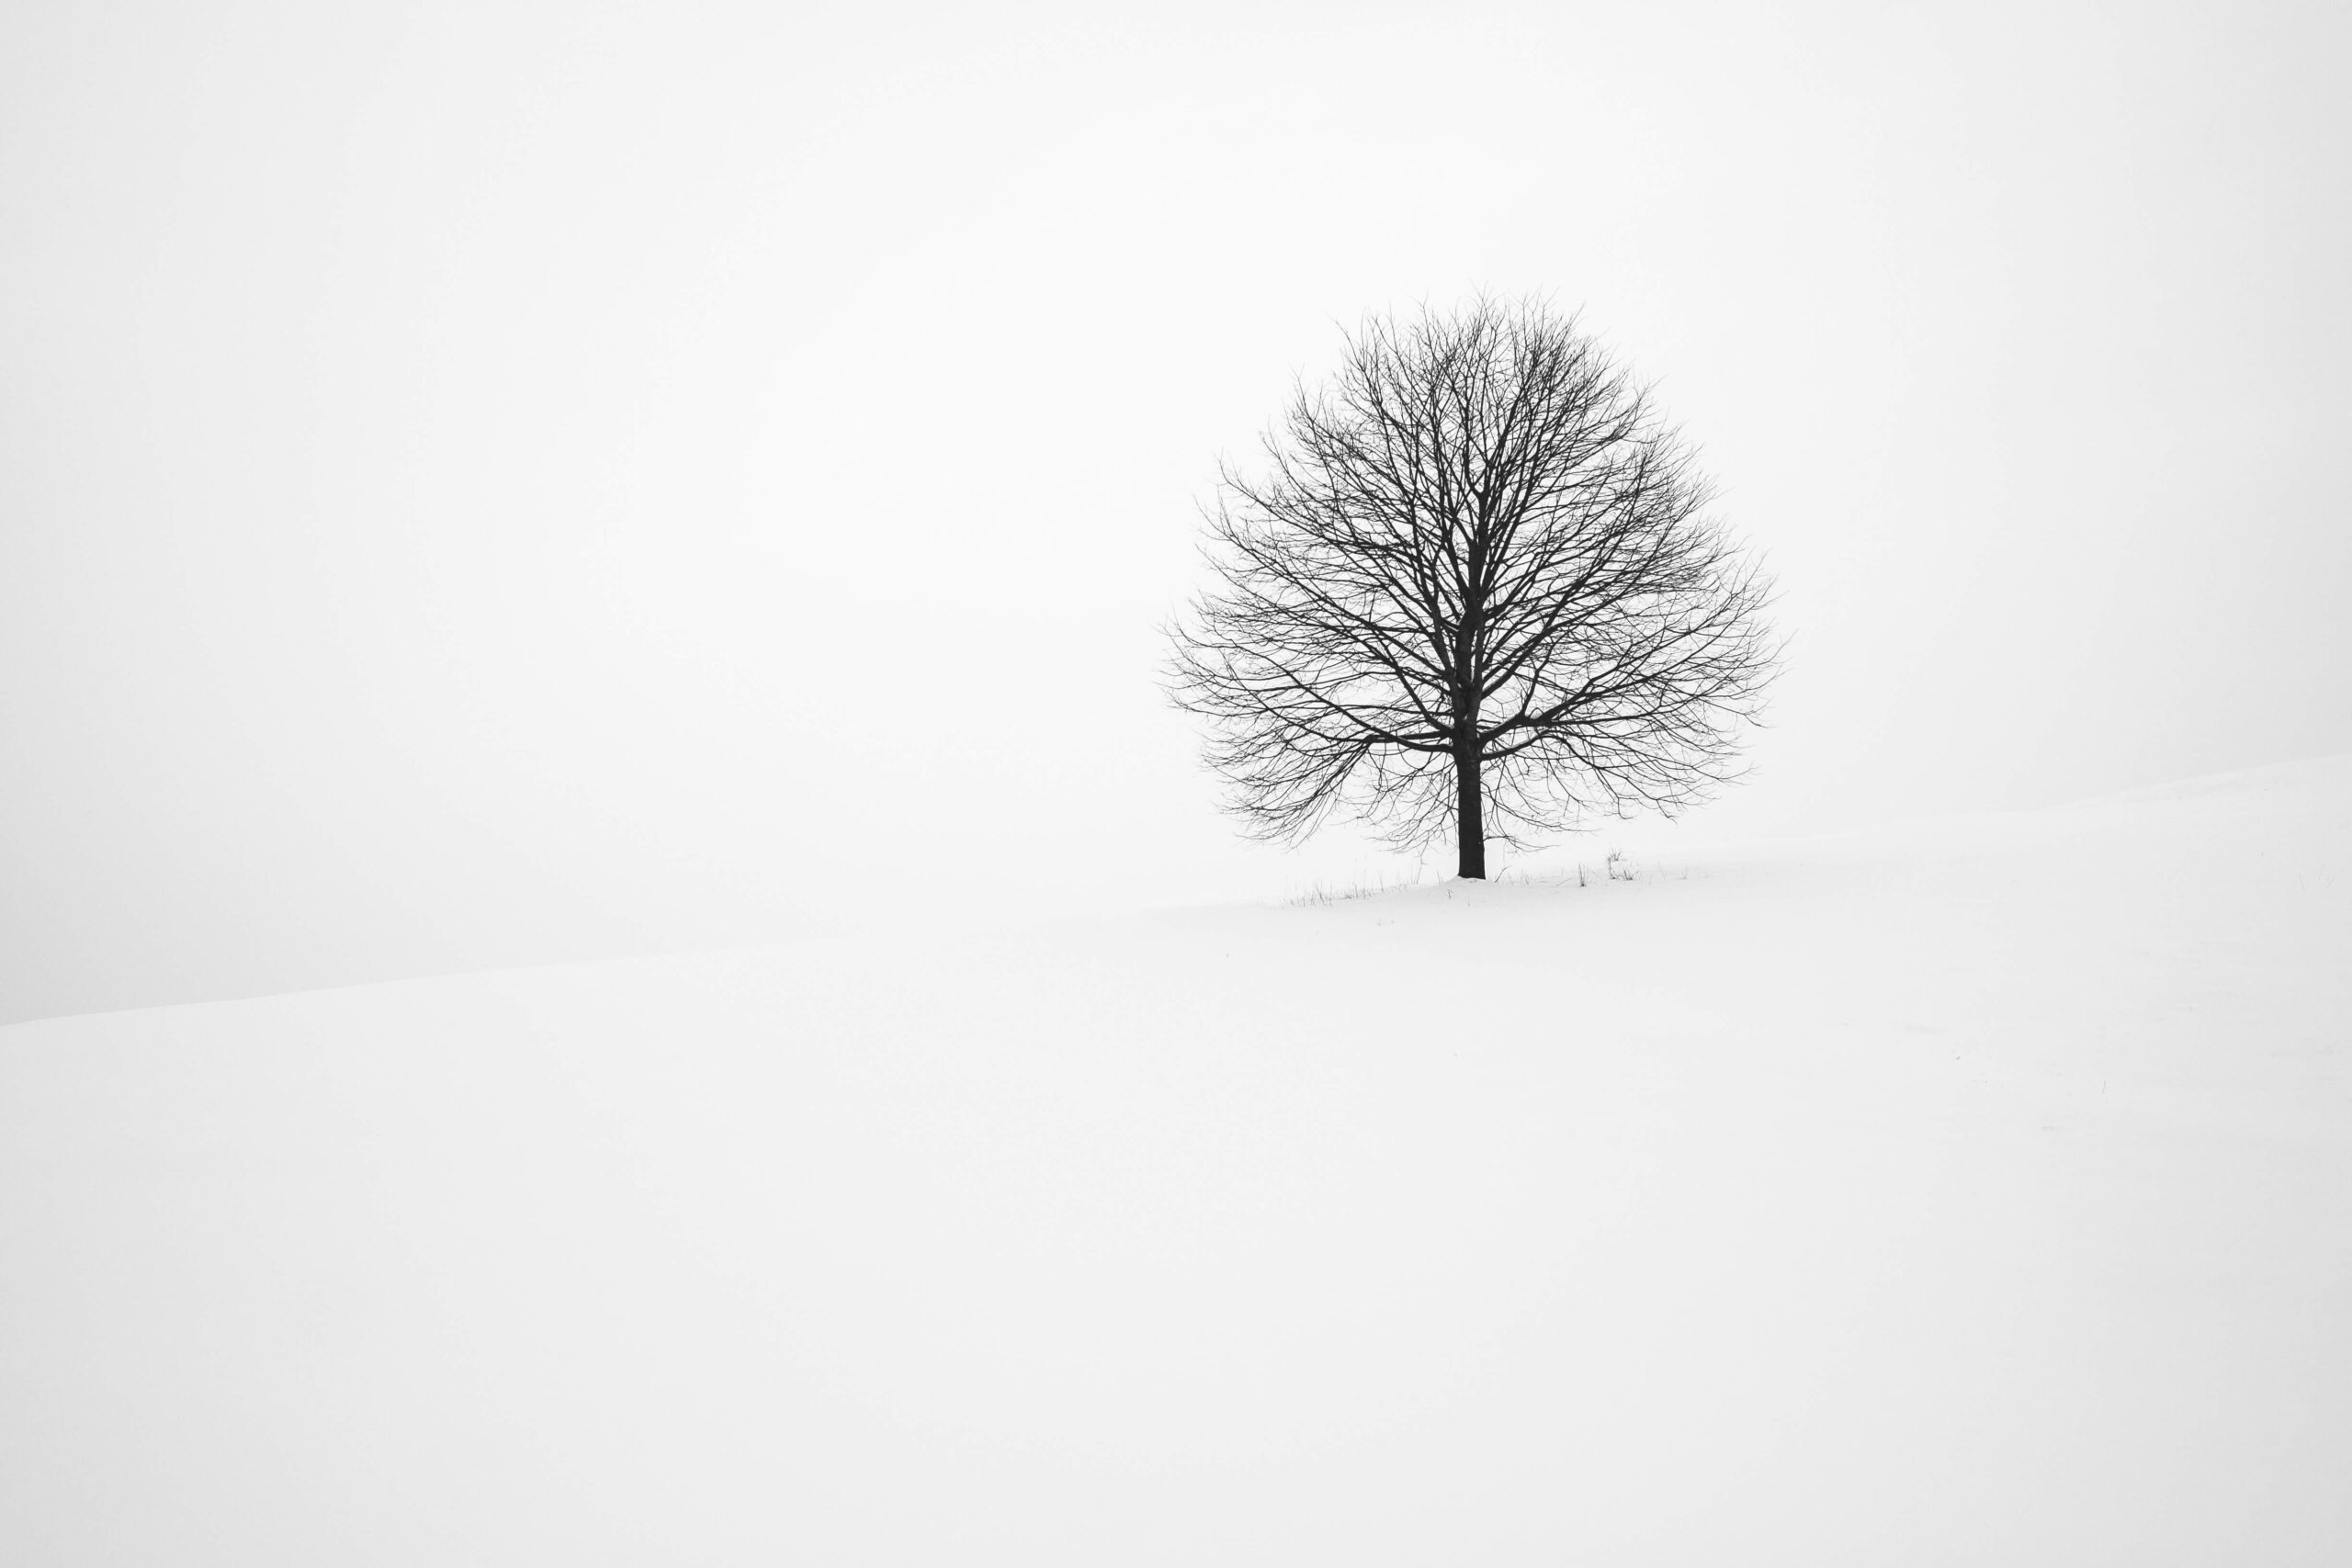 A lonely tree on a snowy landscape.